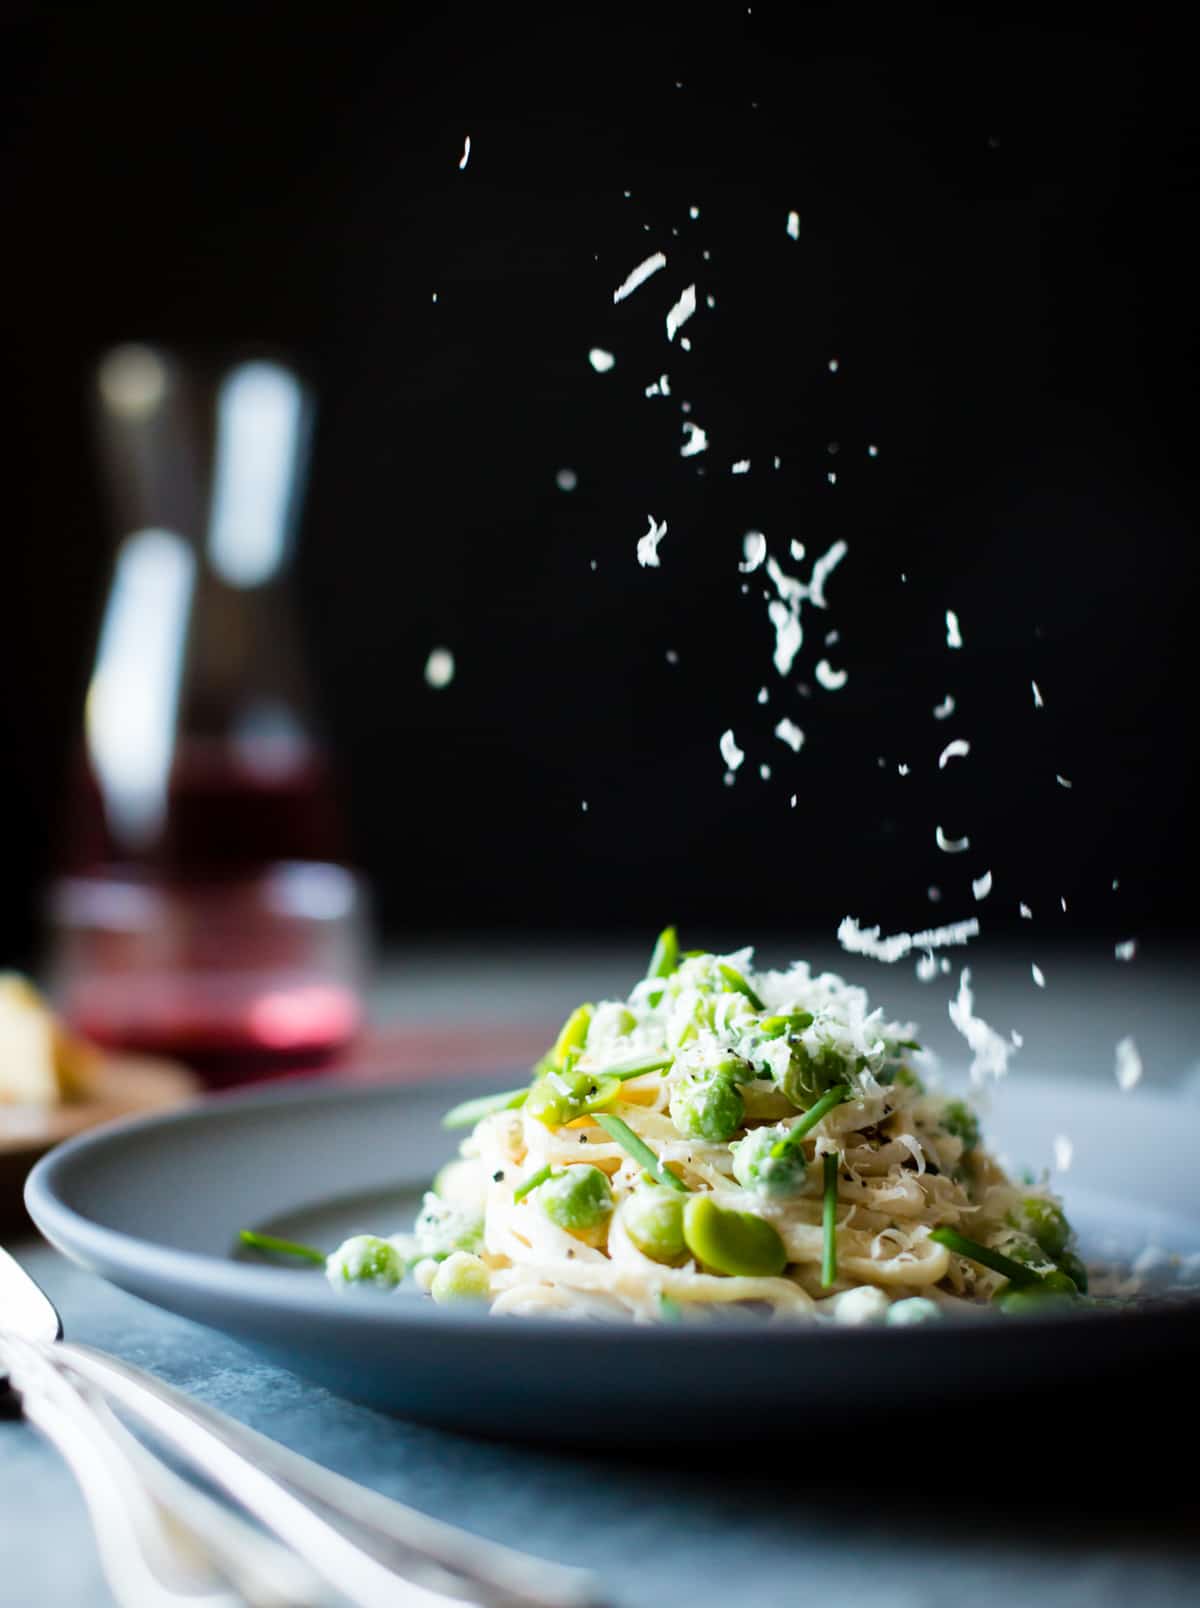 sprinkling cheese on Creamy Cashew-Miso Pasta with Peas and Fava Beans {gluten-free, vegan option}